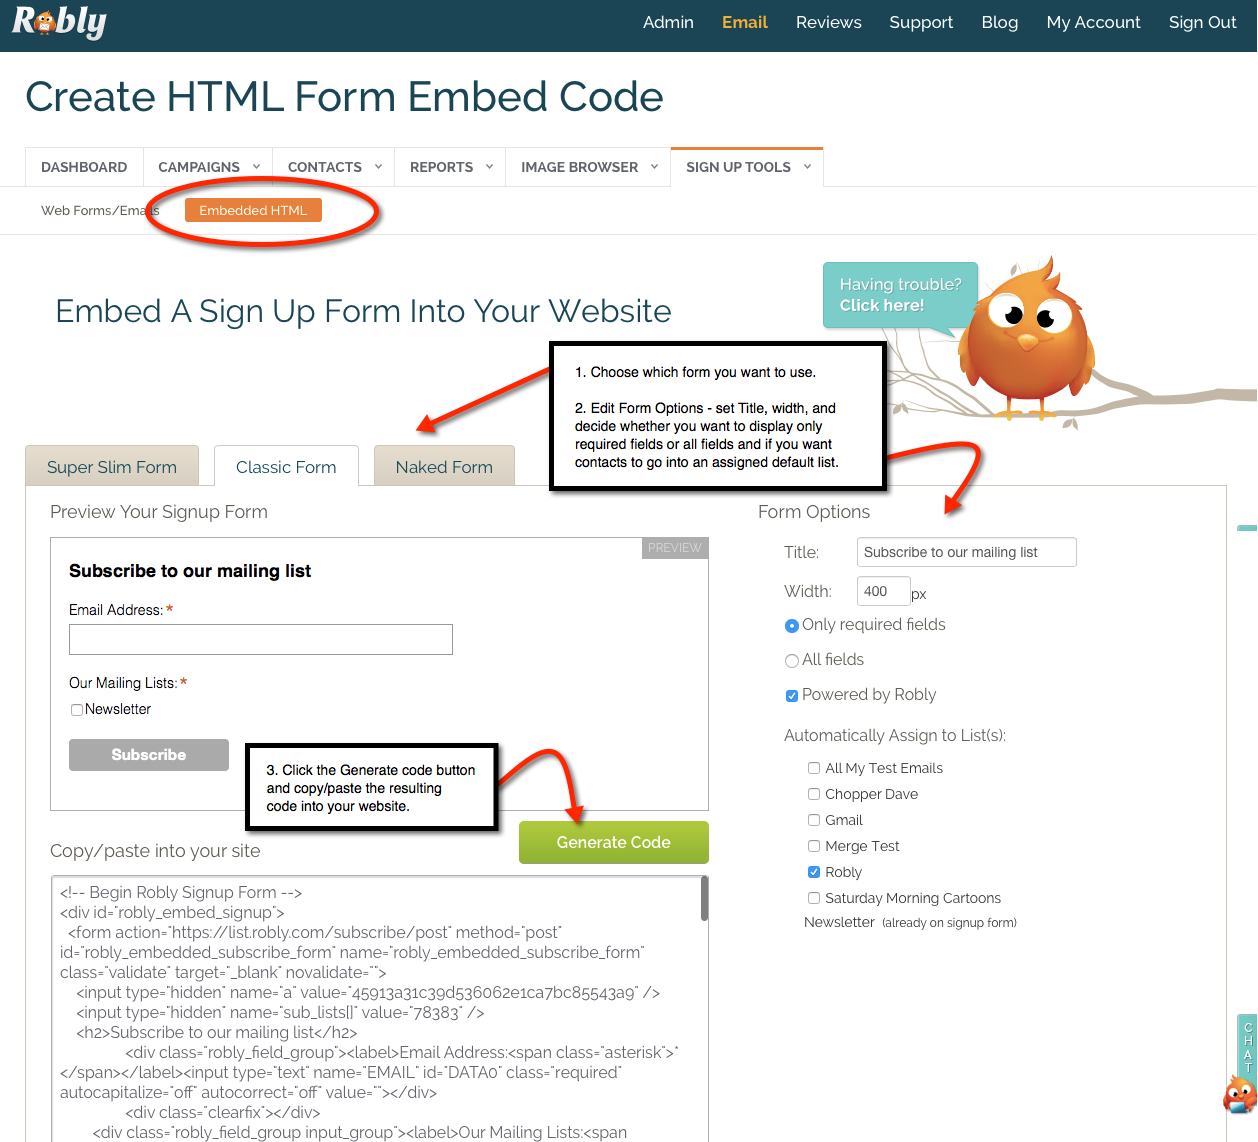 Create an HTML form for your website